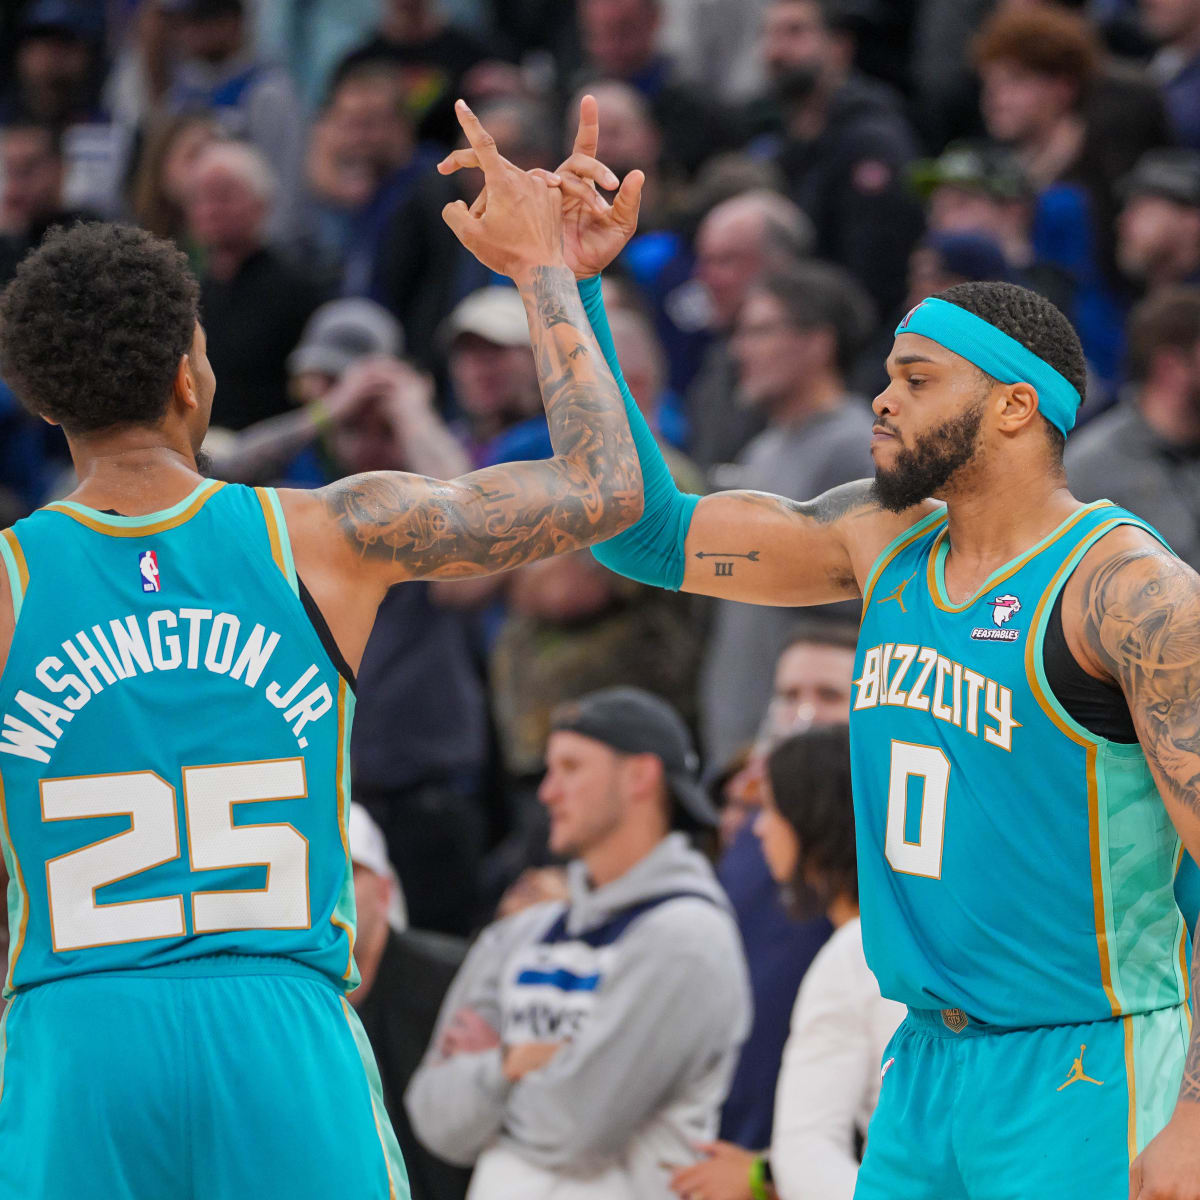 New Charlotte Hornets owners to face potential challenge with RSN